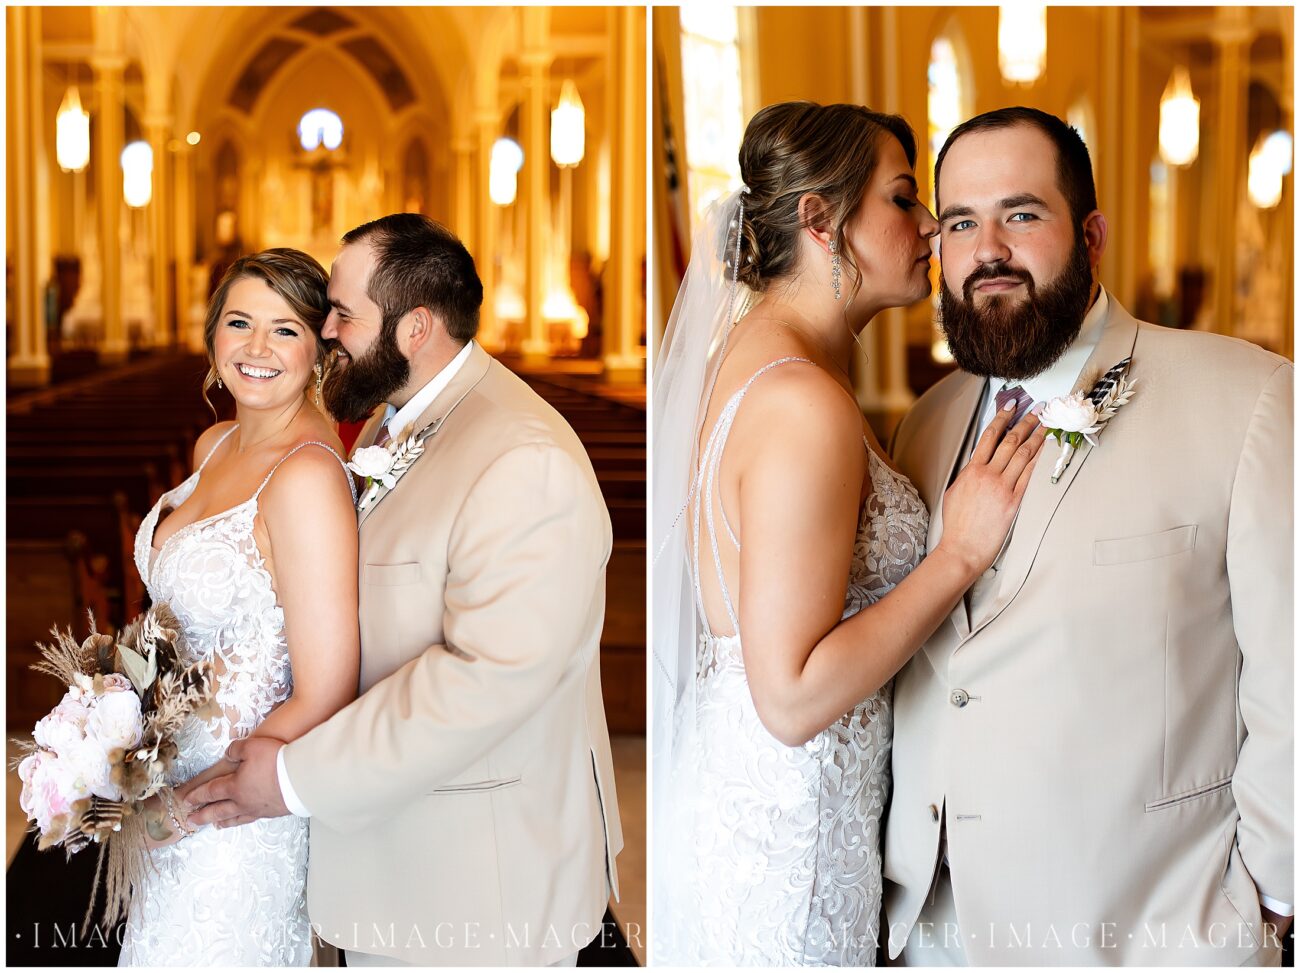 A small town wedding for Casey and Adam. A collage of two portraits inside of the beautifully detailed church. The first of the bride looking at the camera and the groom looking at her. The second of the bride looking at her groom and the groom looking at the camera.

Saint John the Baptist Catholic Church, L'erable, IL. 

Photo taken by Mager Image Photography.